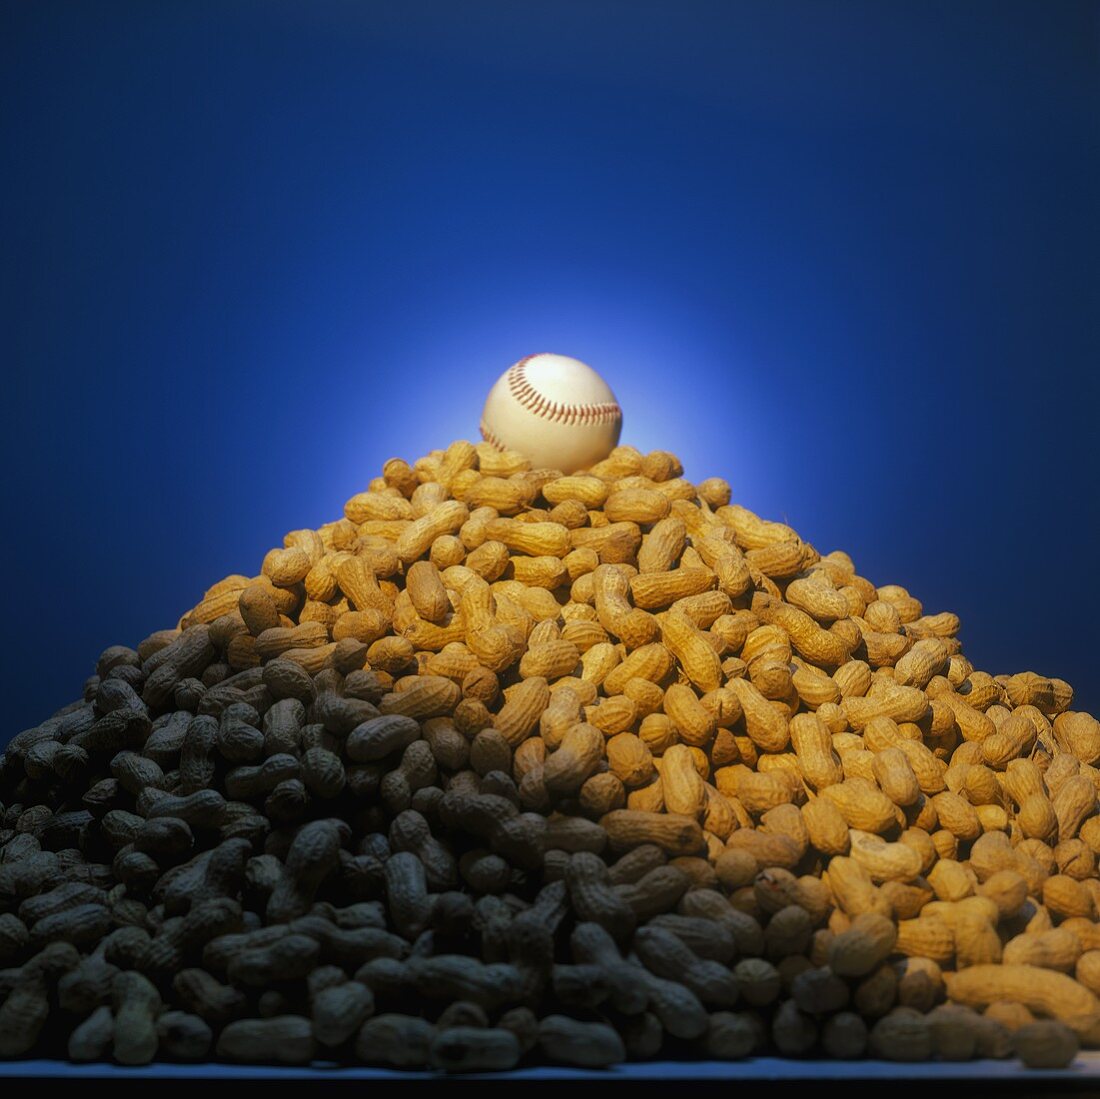 Pile of Unshelled Peanuts with a Baseball Resting on Top